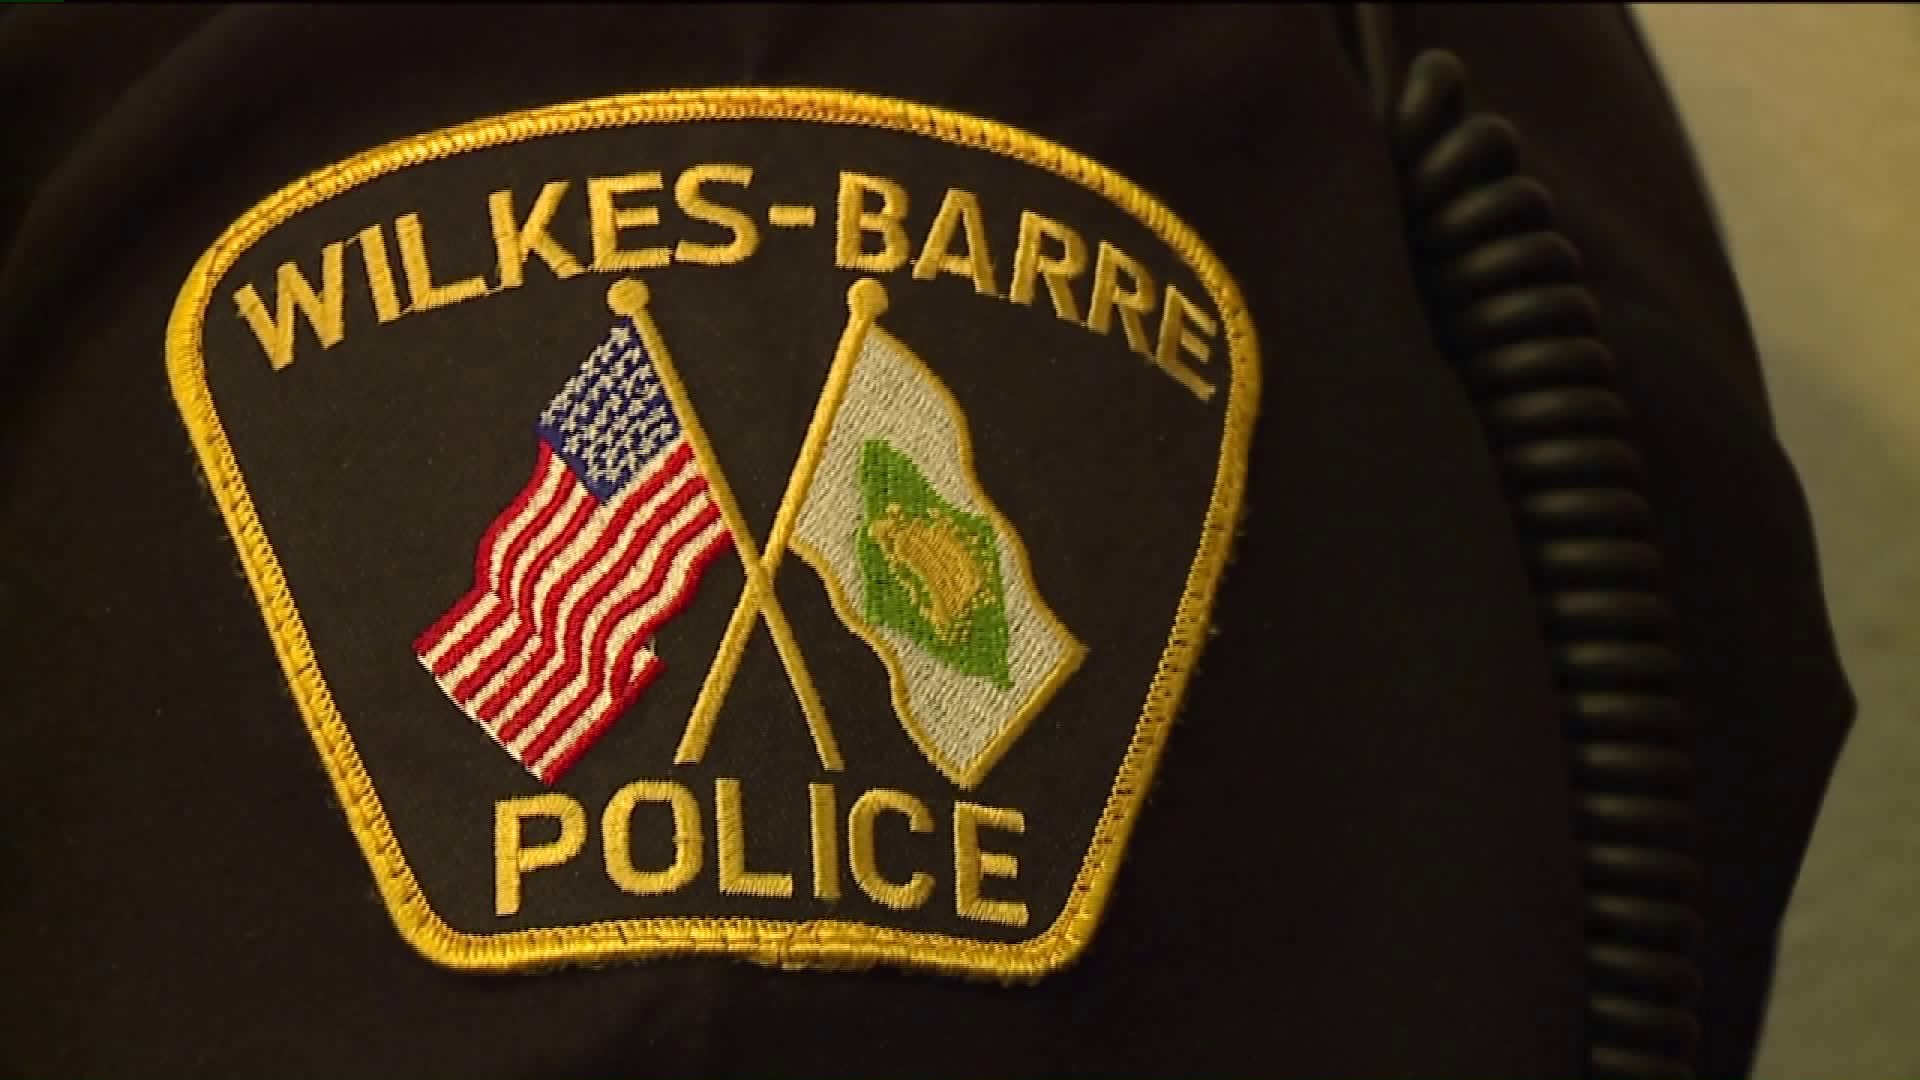 In Wilkes-Barre, A Vote To Investigate Police Department